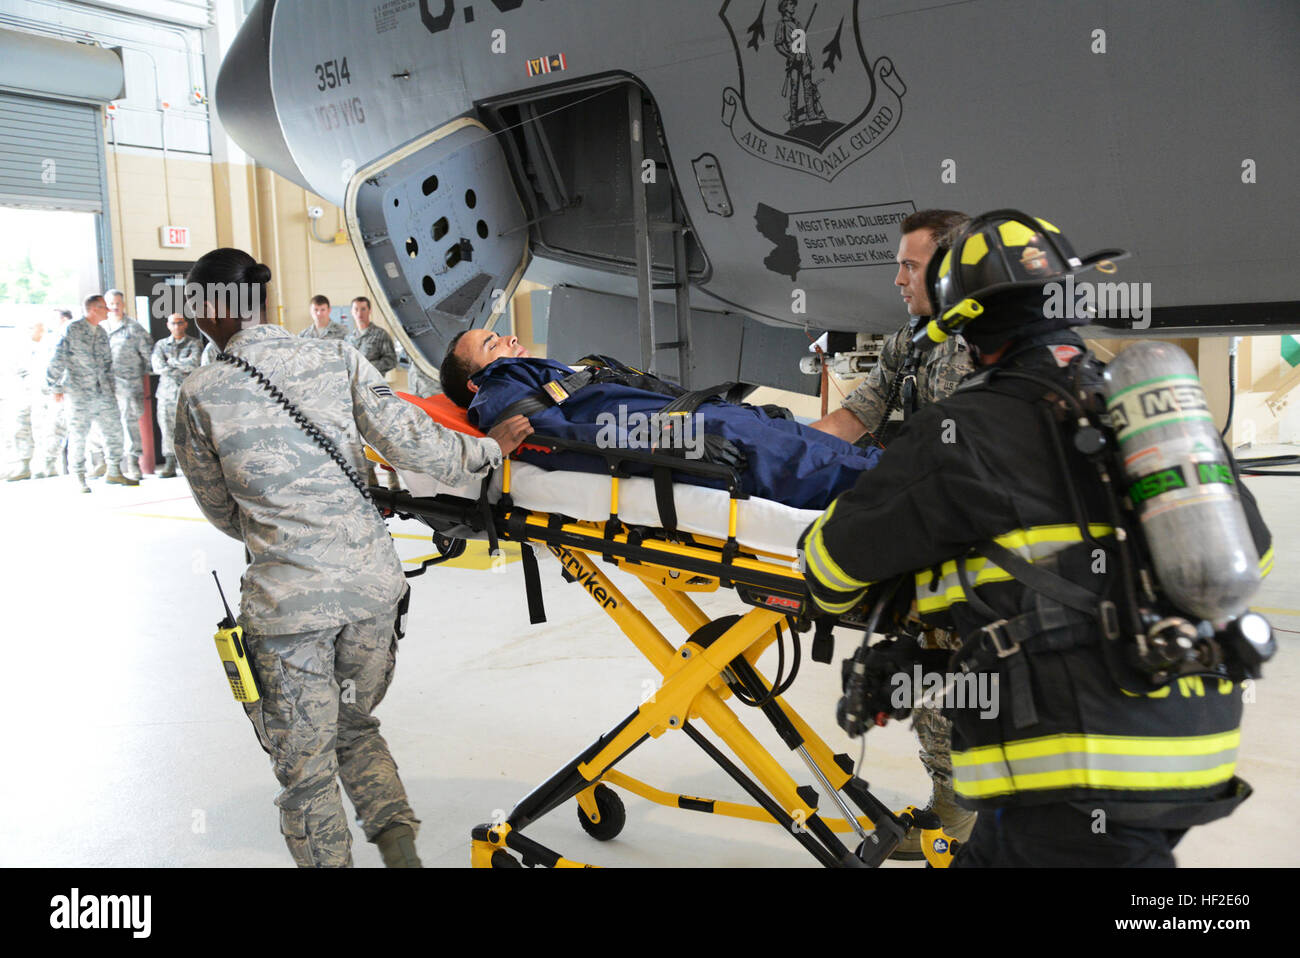 Airman 1st Class Leonardo Lantigua-Menendez, 108th Wing Maintenance Squadron, is wheeled away from the scene where he was extracted from a fuel tank. Airmen from the 108th Maintenance Squadron, 108th Wing, New Jersey Air National Guard, perform a fuel tank extraction to test the procedures to extract an unconscious victim from a KC-135R Stratotanker fuel tank at Joint Base McGuire-Dix-Lakehurst, N.J., Aug. 22, 2014. The exercise involved multiple Joint Base organizations including the 108th Wing and the 87th Bio-Environmental shops, the 87th Fire Department and both the 108th and the 87th Safe Stock Photo